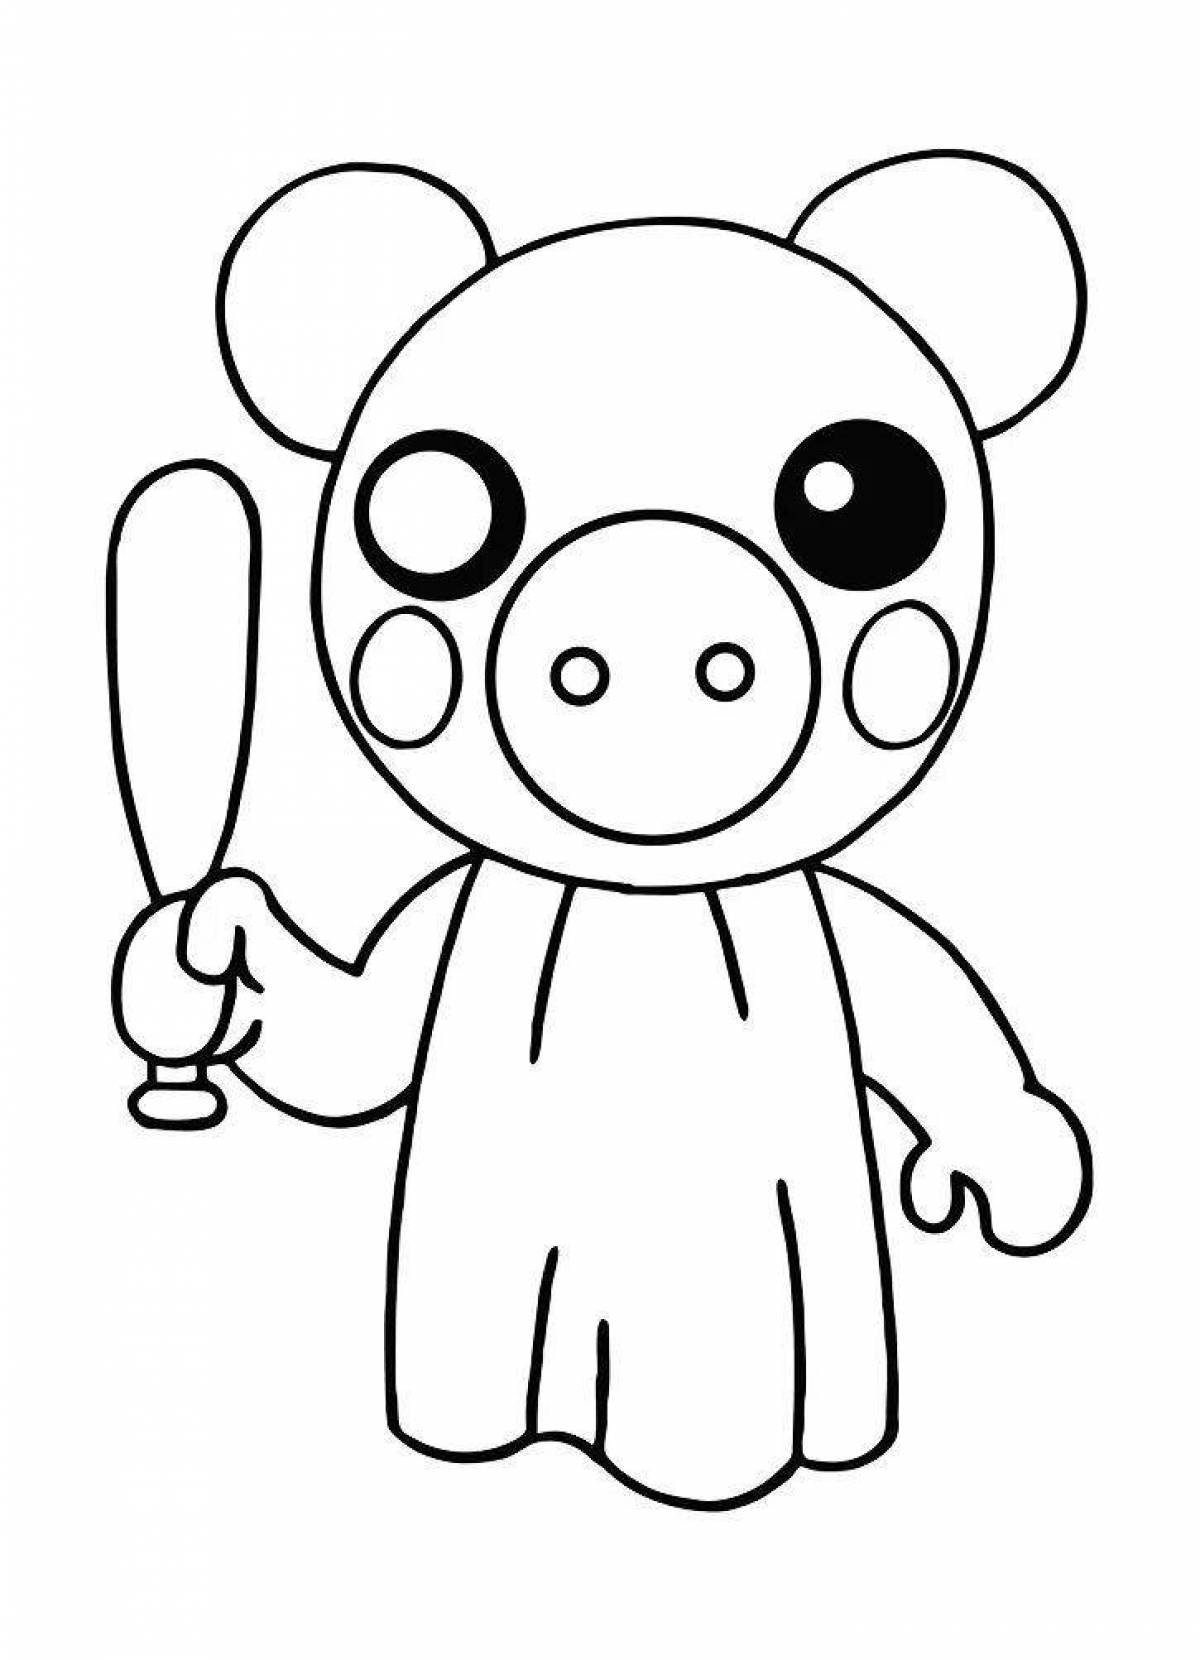 Playful roblox piggy coloring page